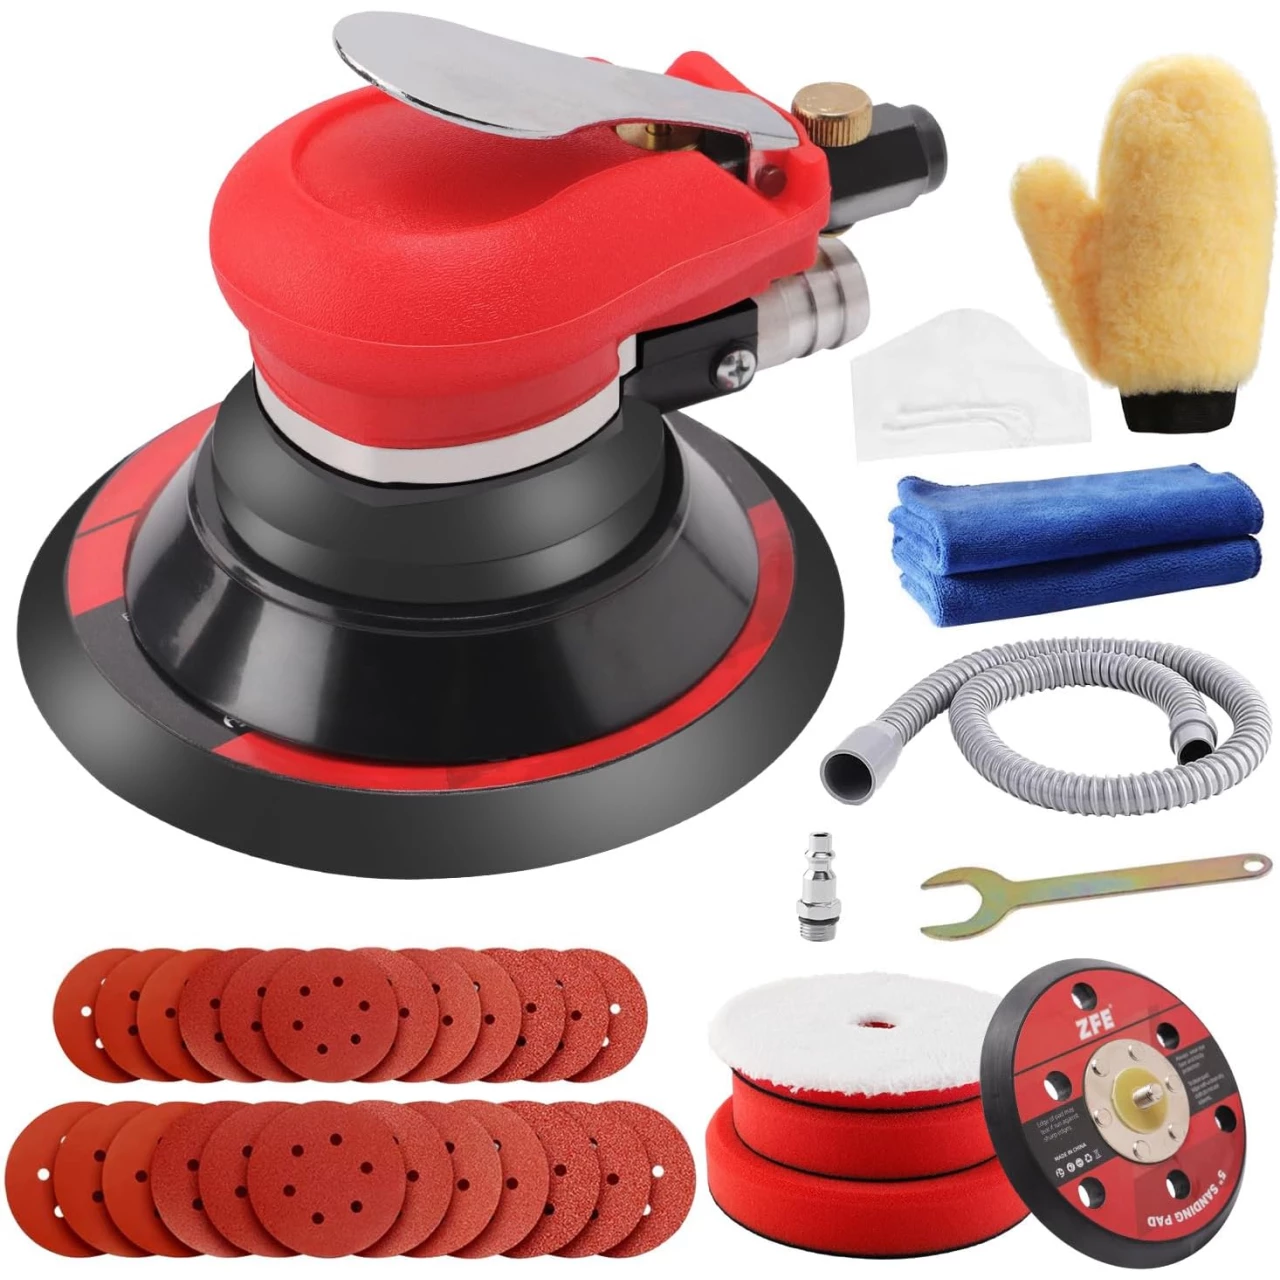 ZFE Random Orbital Sander 5&quot; &amp; 6&quot; Pneumatic Palm Sander with Extra 5&quot; Backing Plate, Sponge Polishing Pads, Sandpapers Low Vibration and Heavy Duty for Wood, Composites, Metal